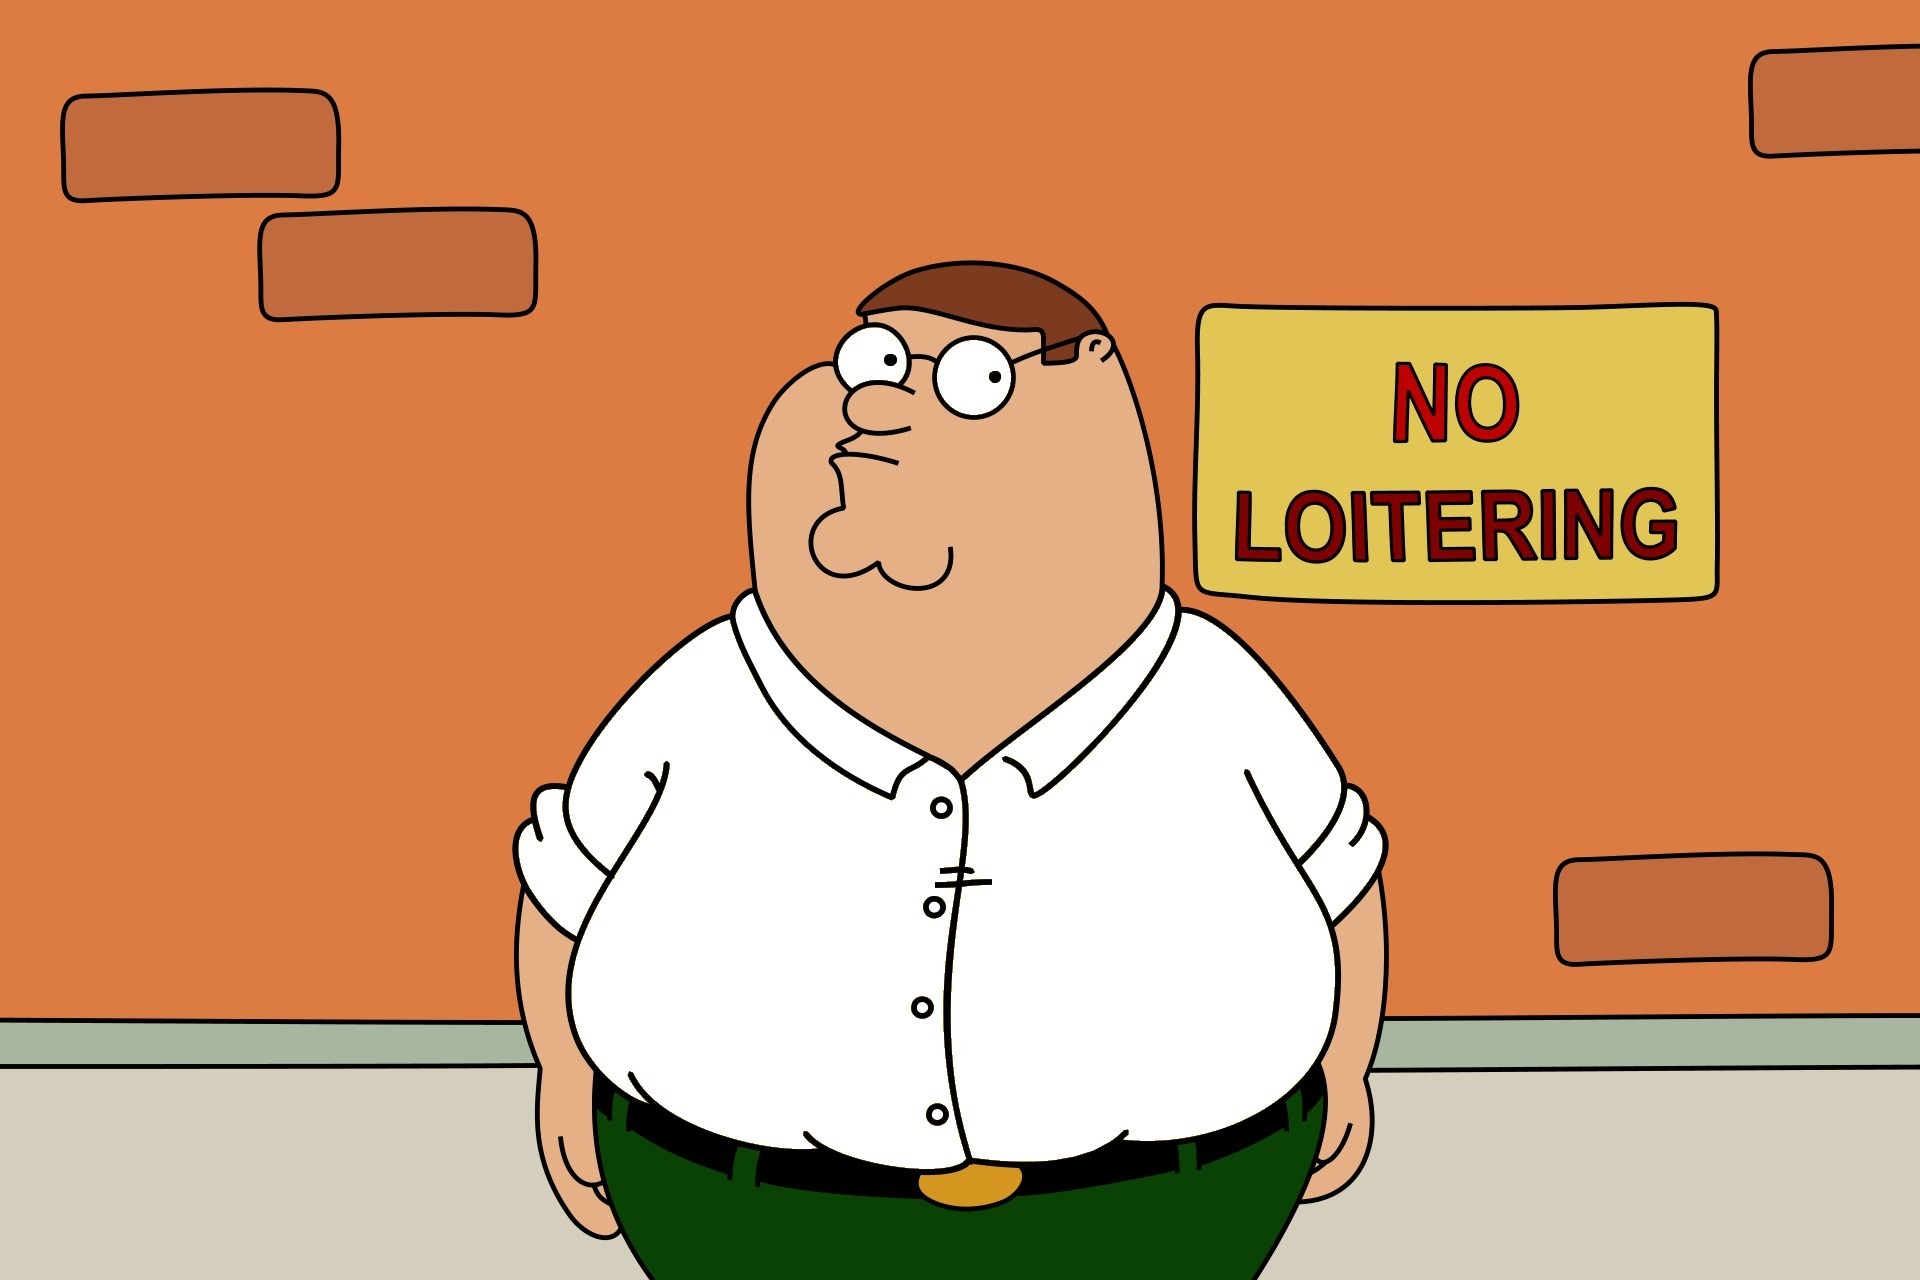 Watch this Interview with a Spot On Peter Griffin Family Guy Cosplayer